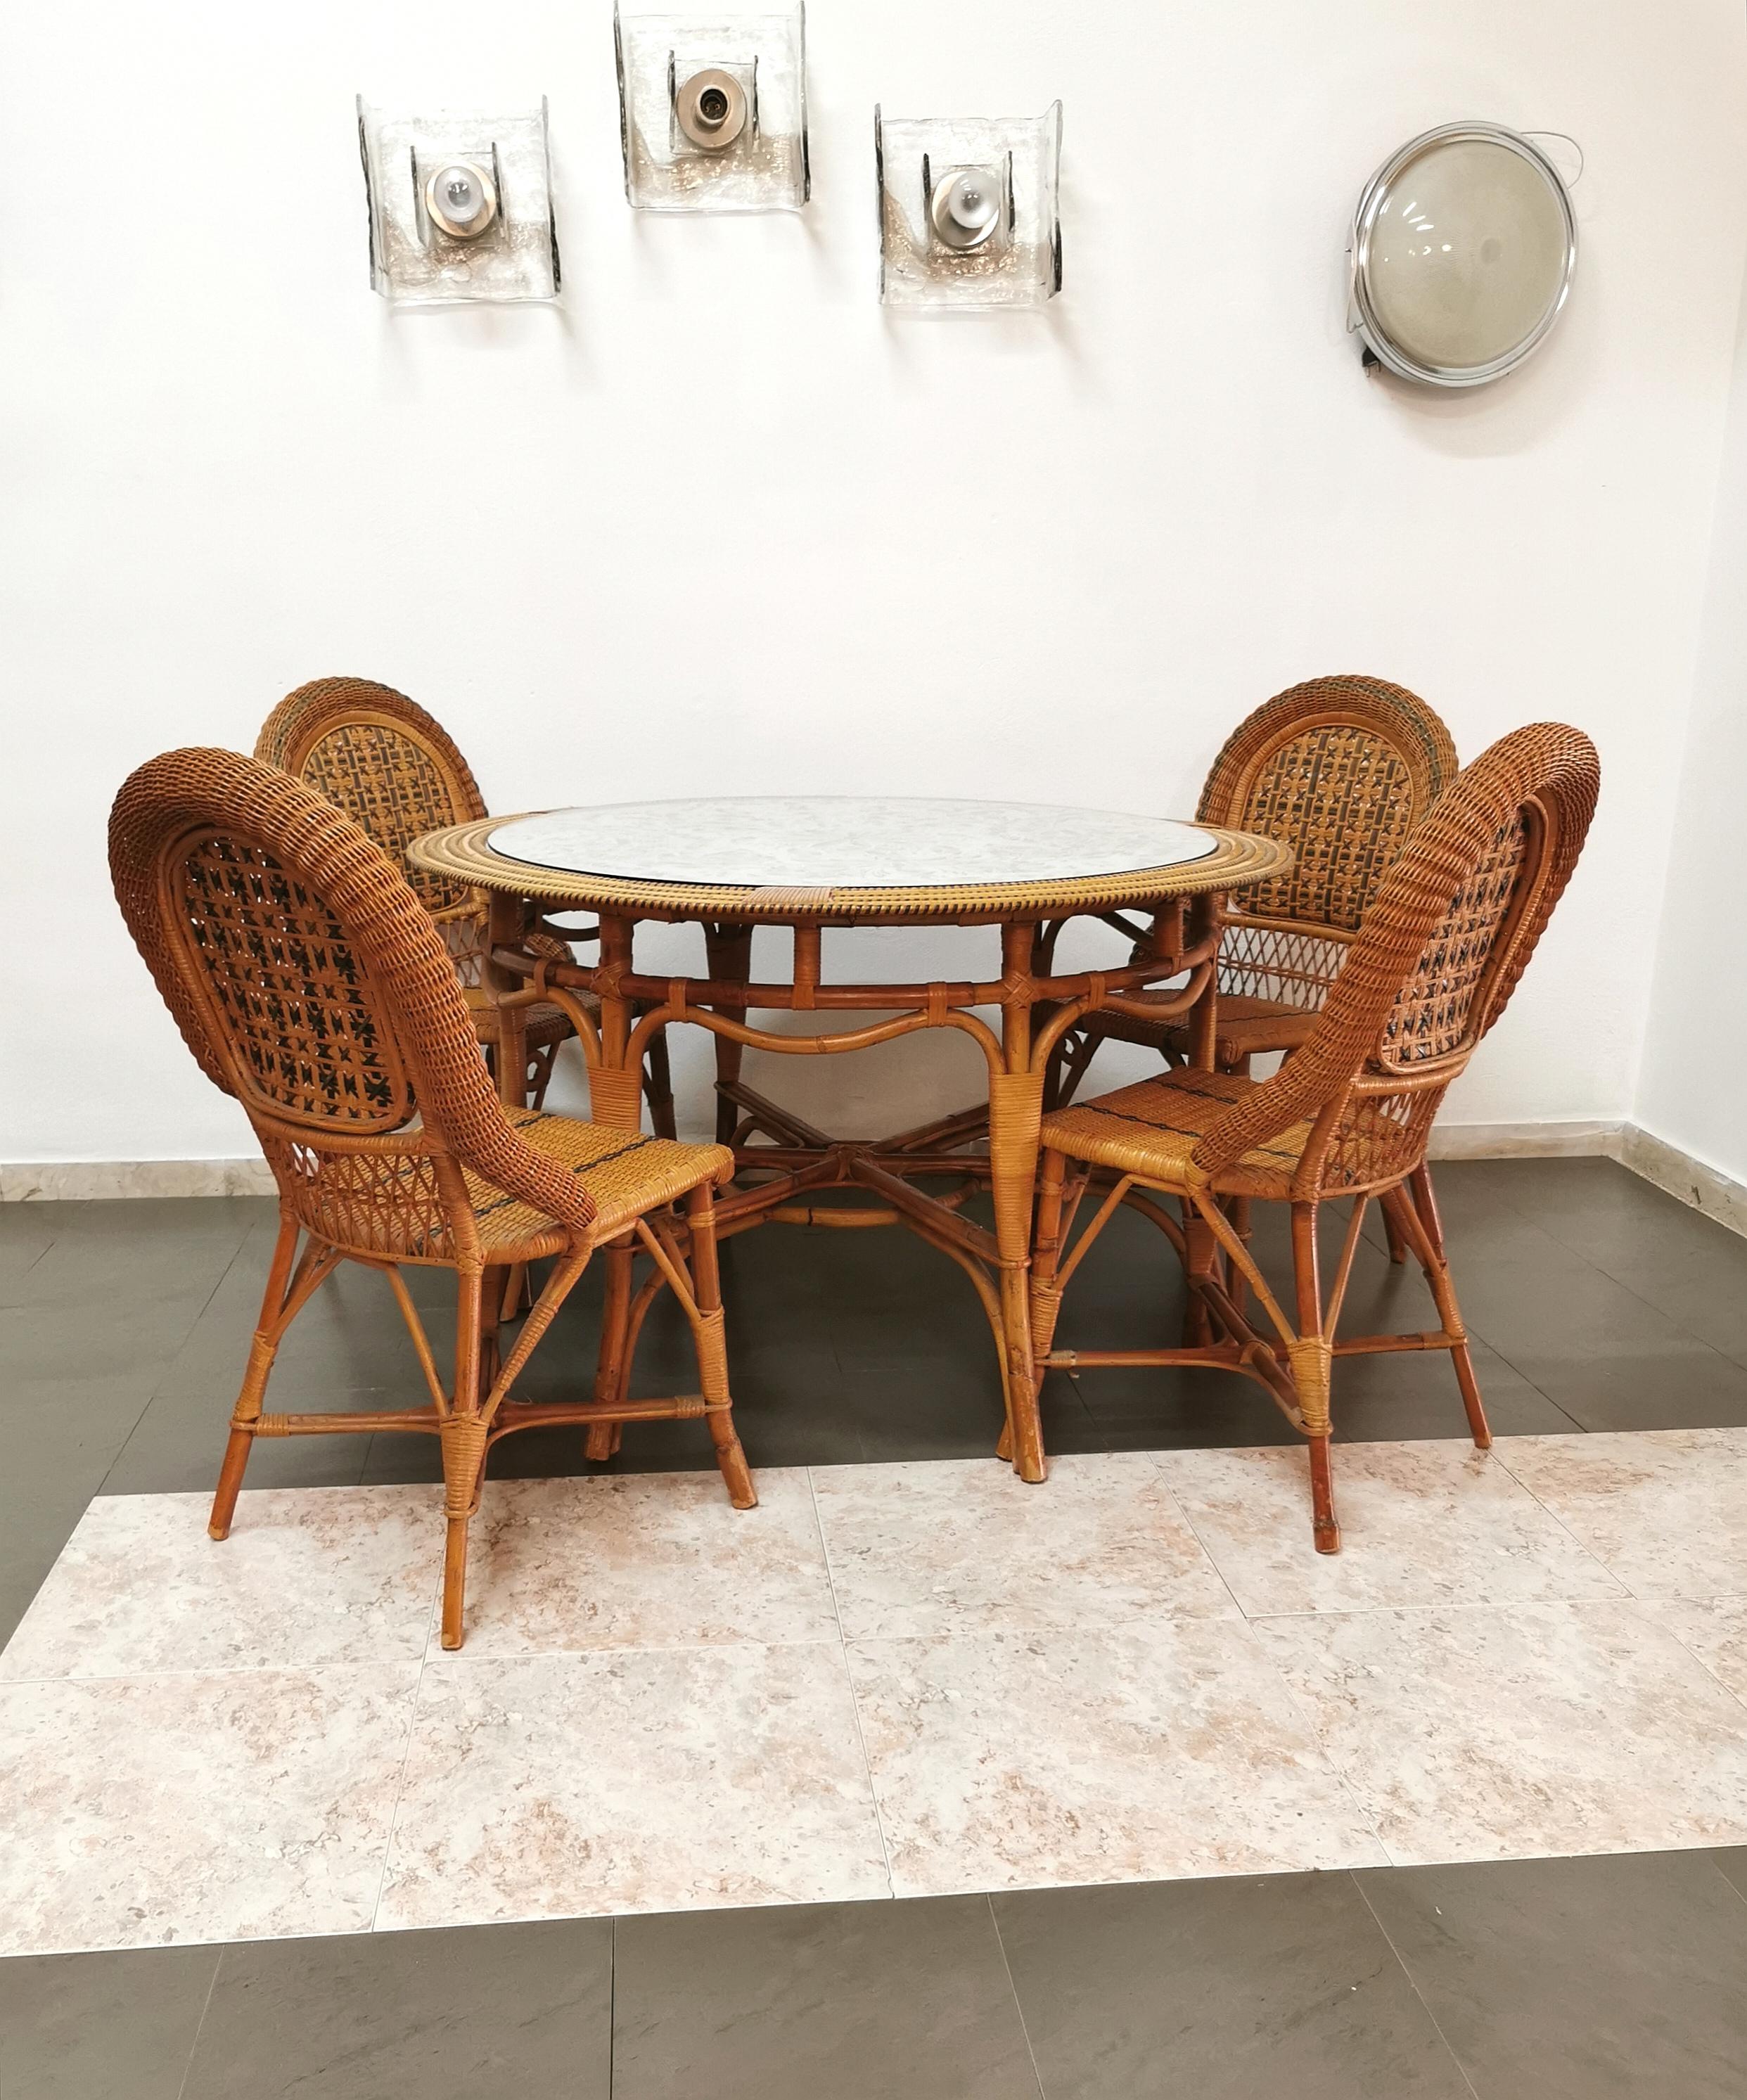 Coordinated set of 4 dining chairs and 1 table produced by Vivai del Sud in the 70s. The chairs were made of bamboo and rattan with particular green weaves. The circular table has a bamboo and rattan structure with a floral patterned fabric top by